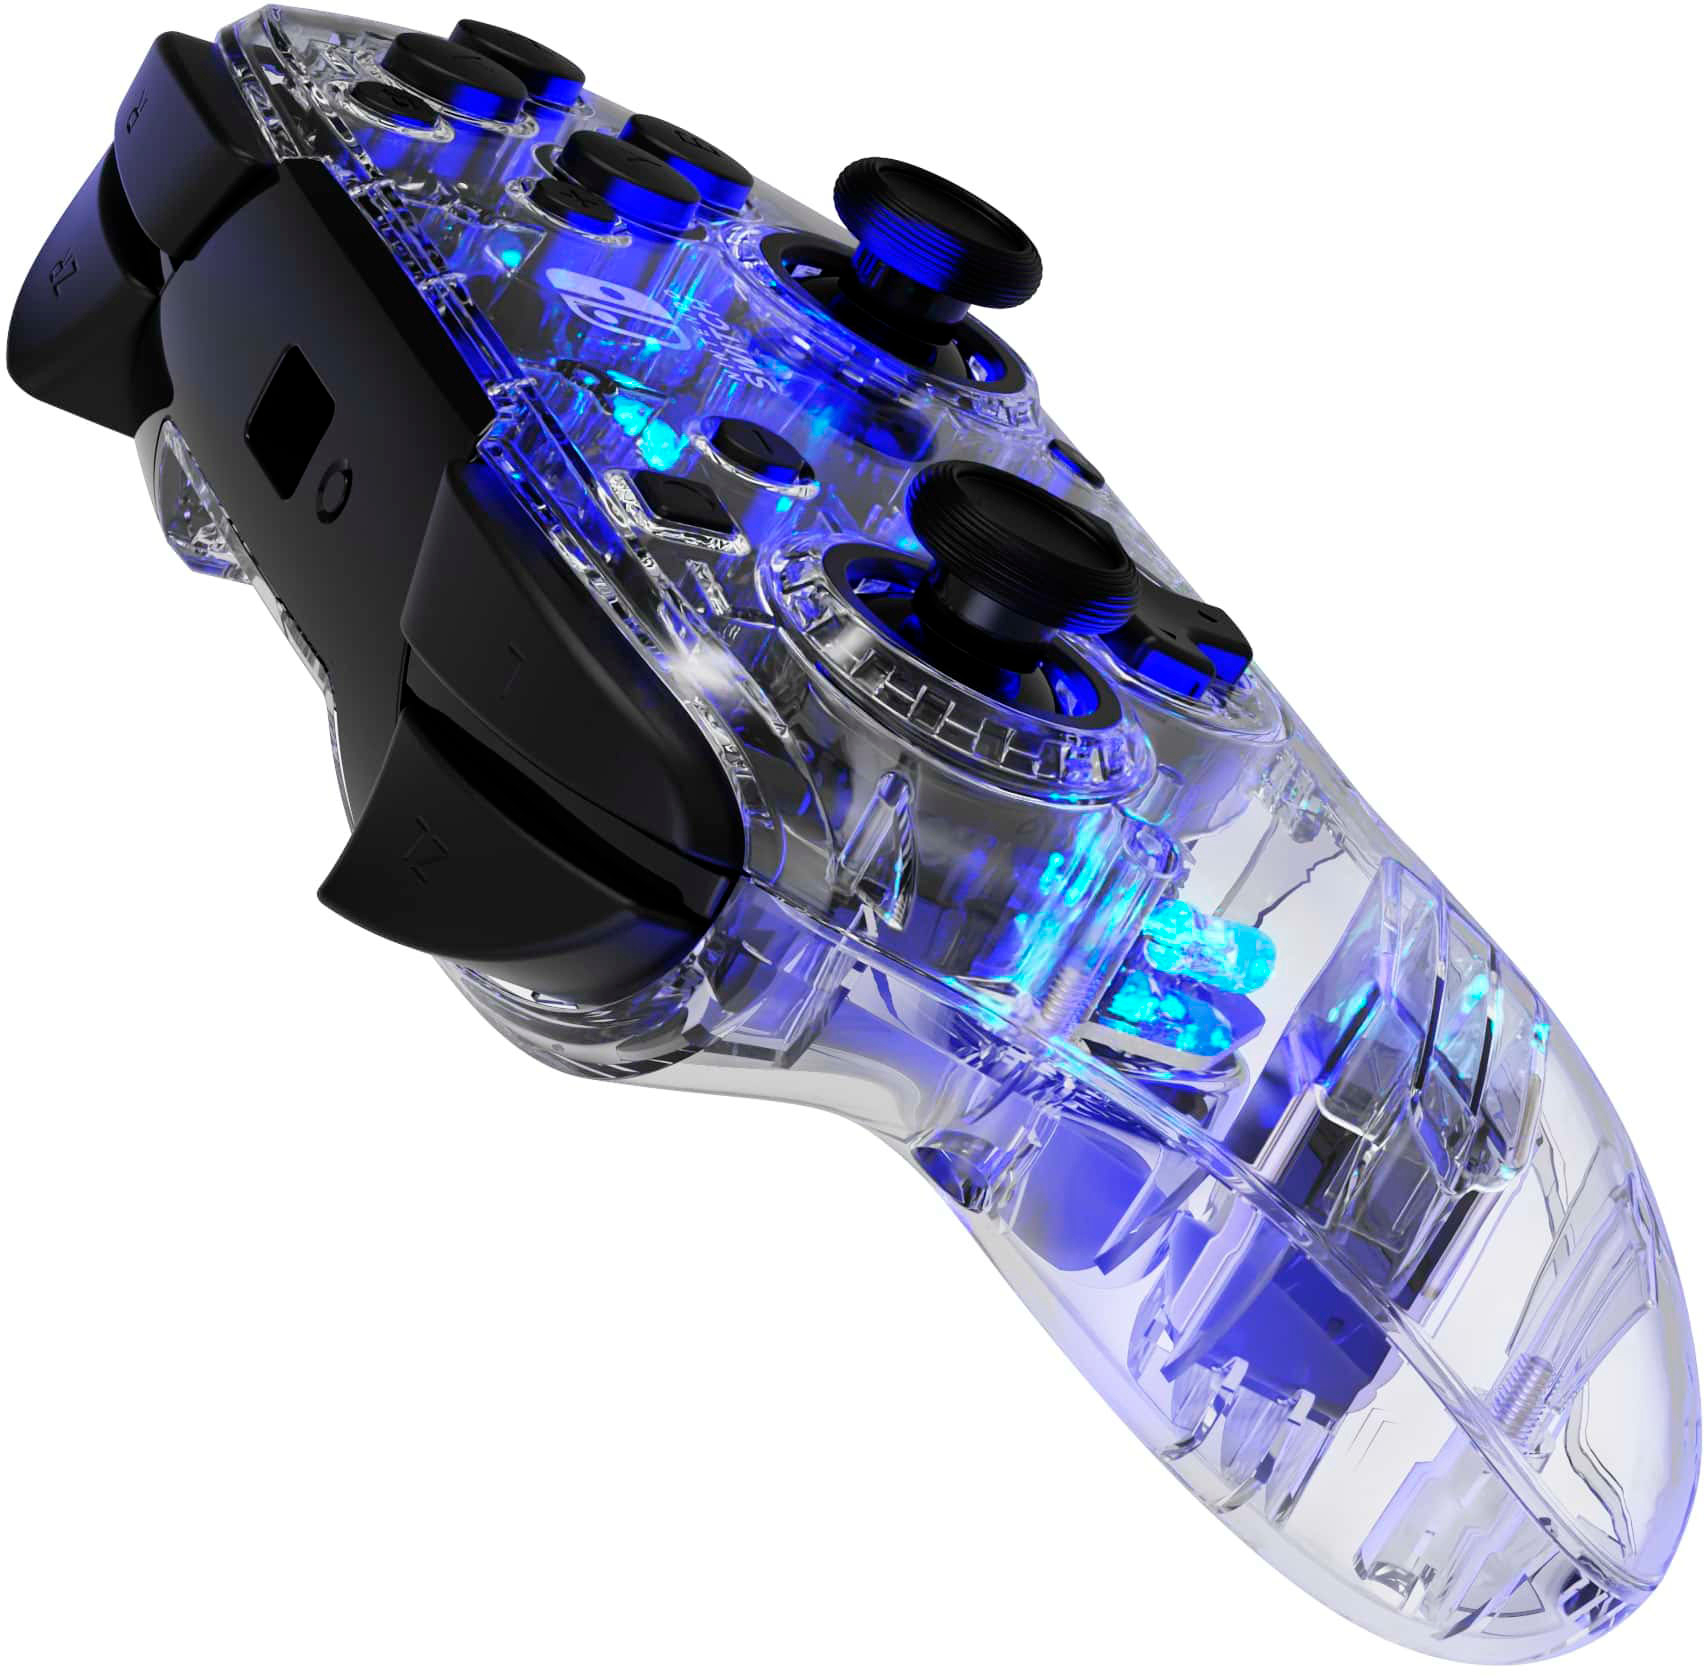 PDP Afterglow LED Wireless Deluxe Gaming Controller: Multicolor 